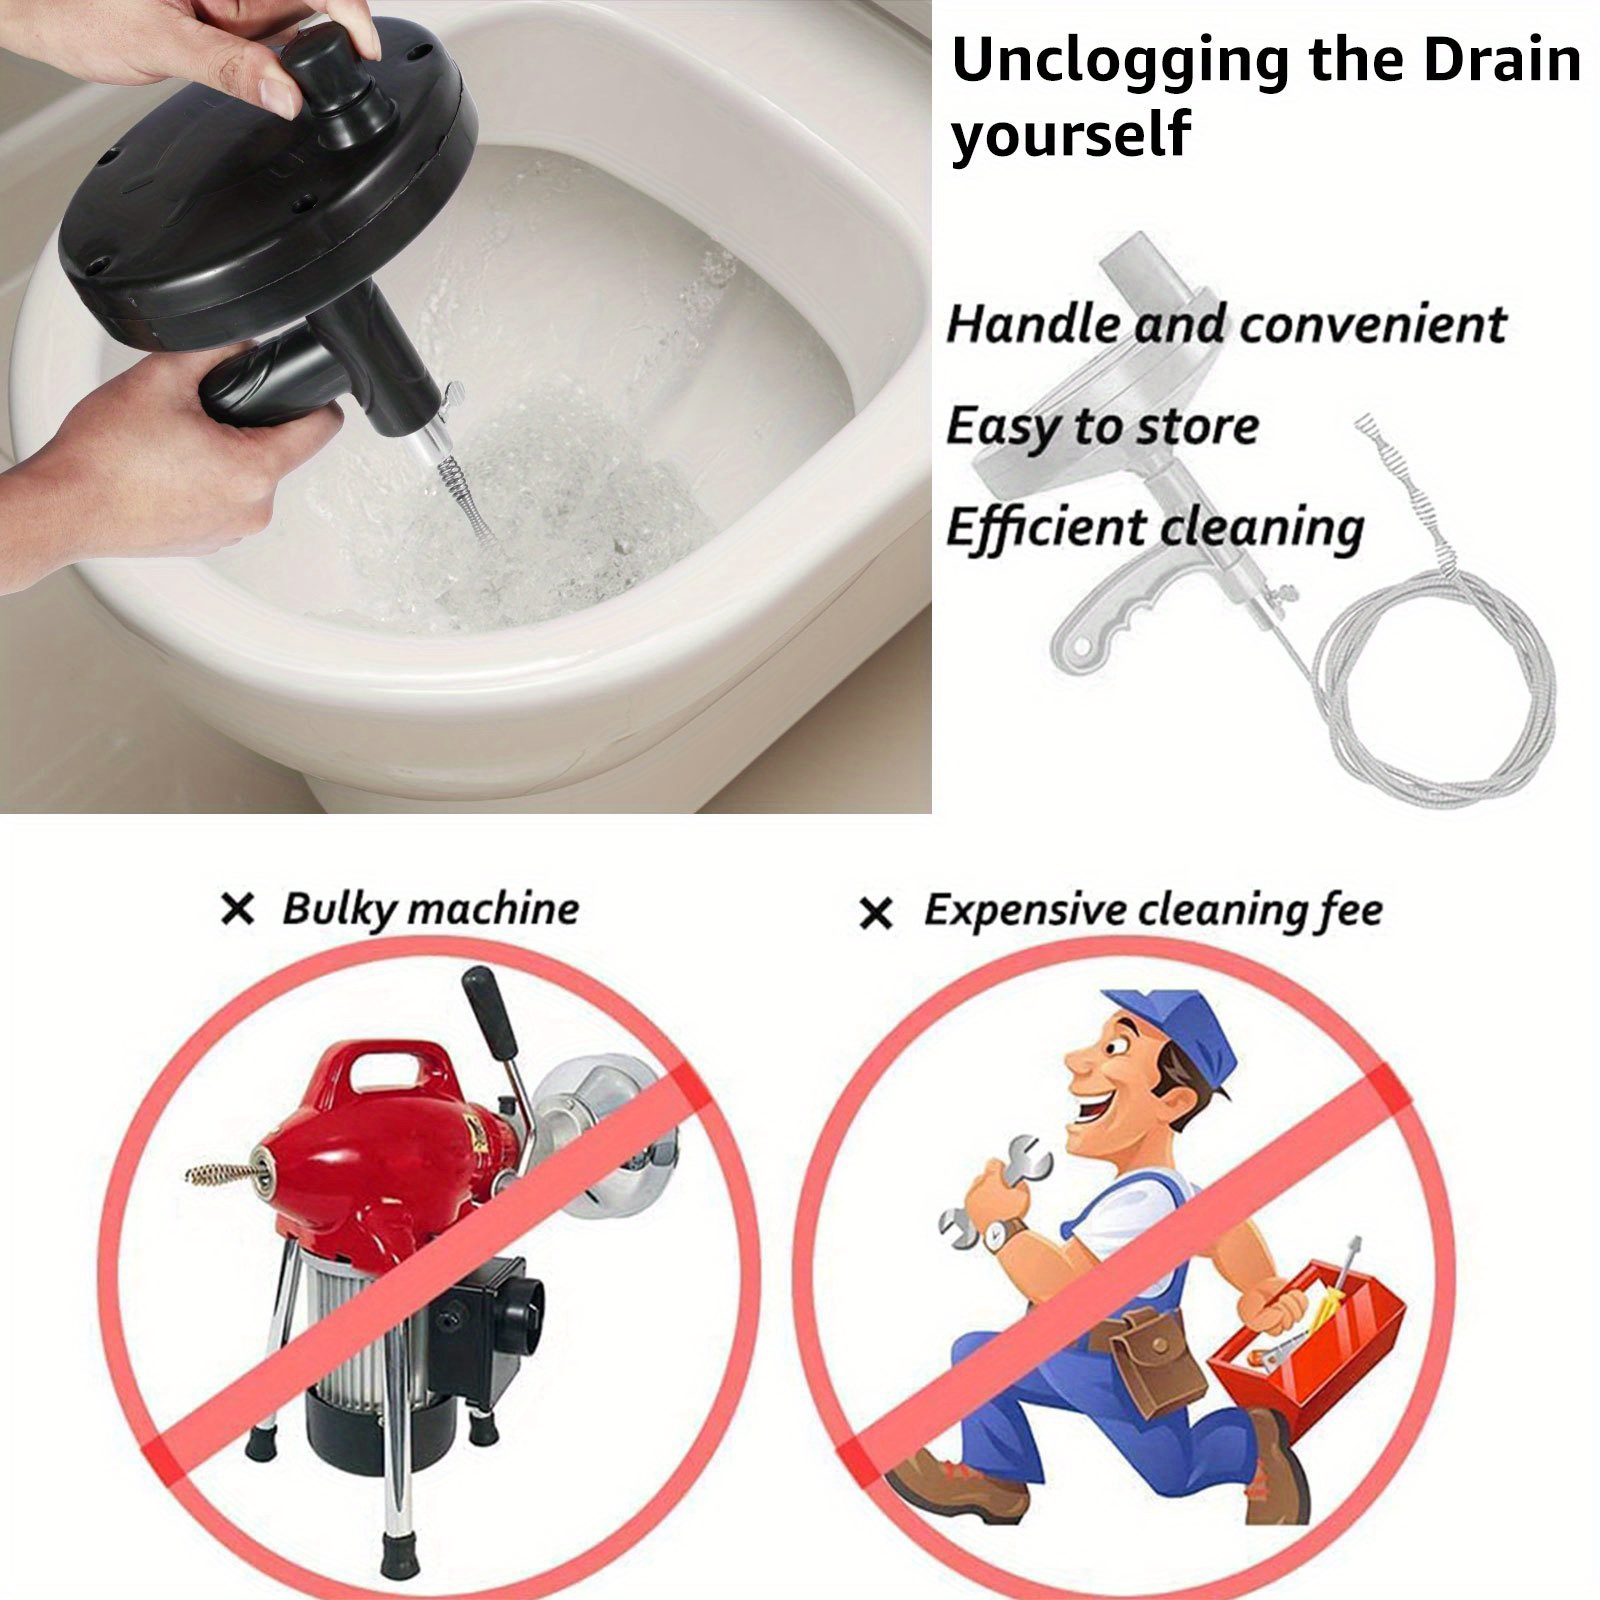 Plumbing Snake Drain Auger Manual Snake Drain Clog Remover with